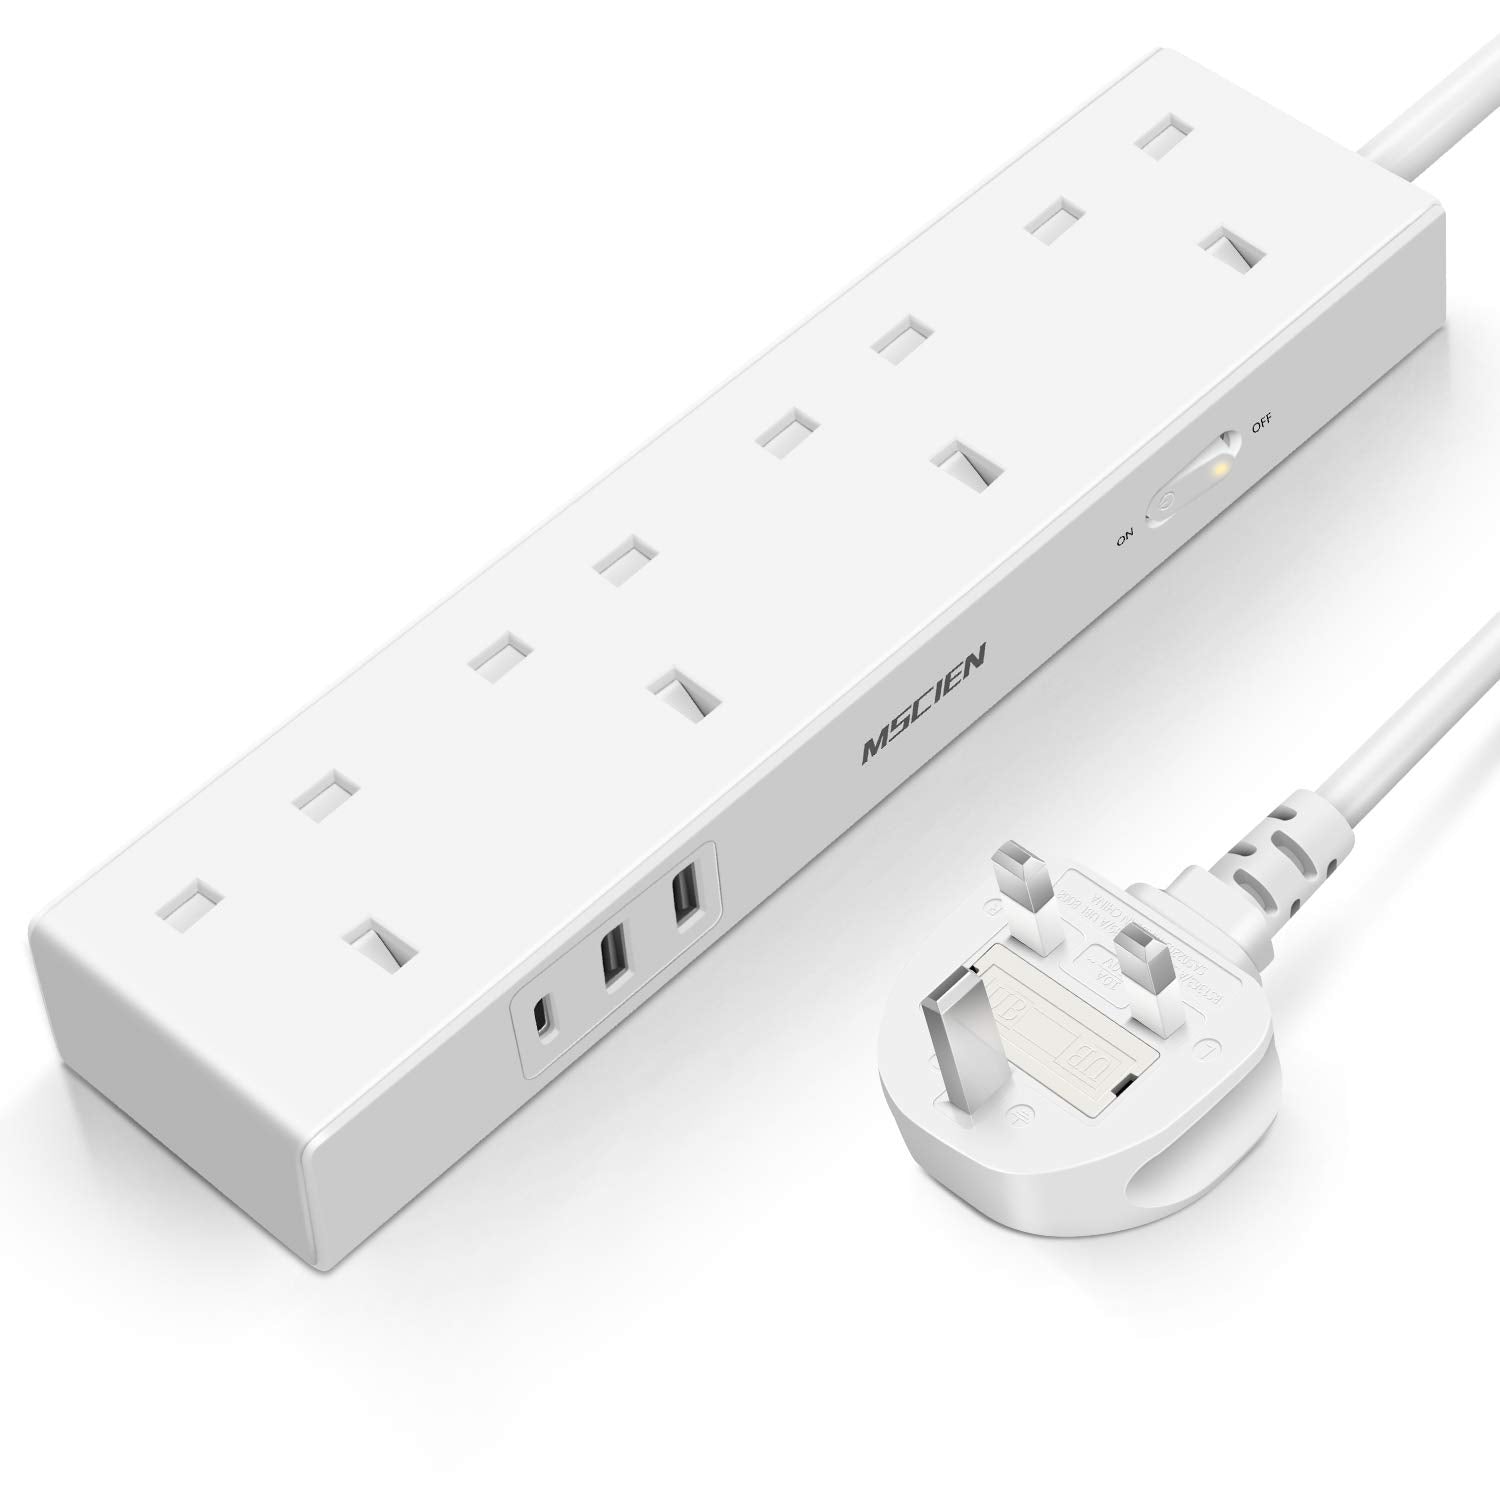 Extension Lead With USB C Slots, Mscien 3M 4 Way Outlets Power Strip With 1 USB-C And 2 USB Ports,Overload Protection Multi Power Plug Extension Socket For Home Office,White